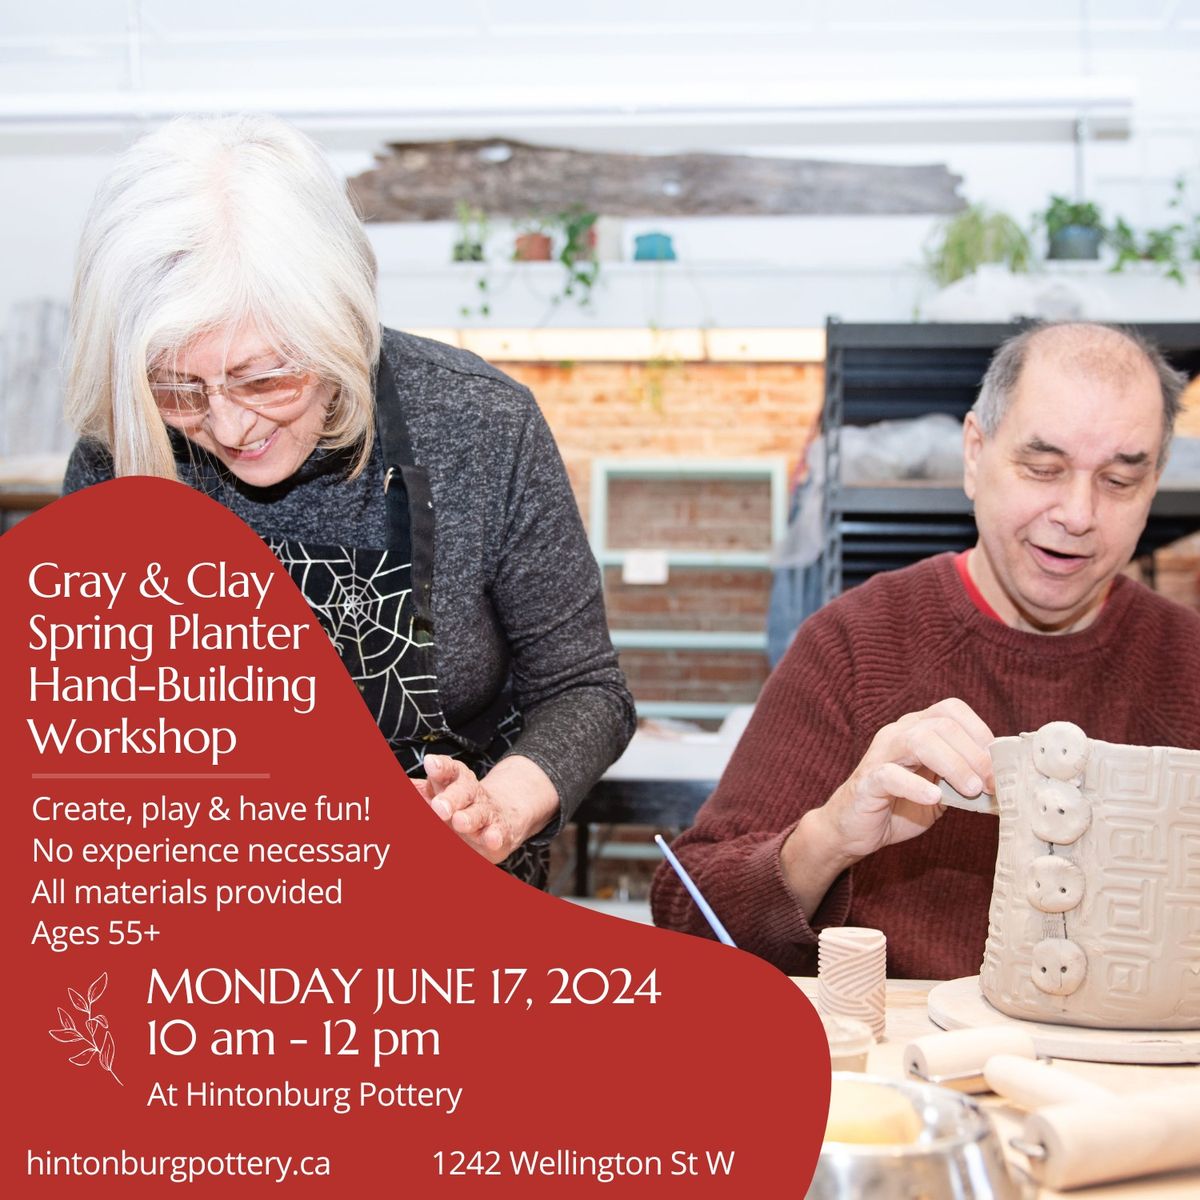 Gray & Clay Spring Planter Hand-Building Workshop